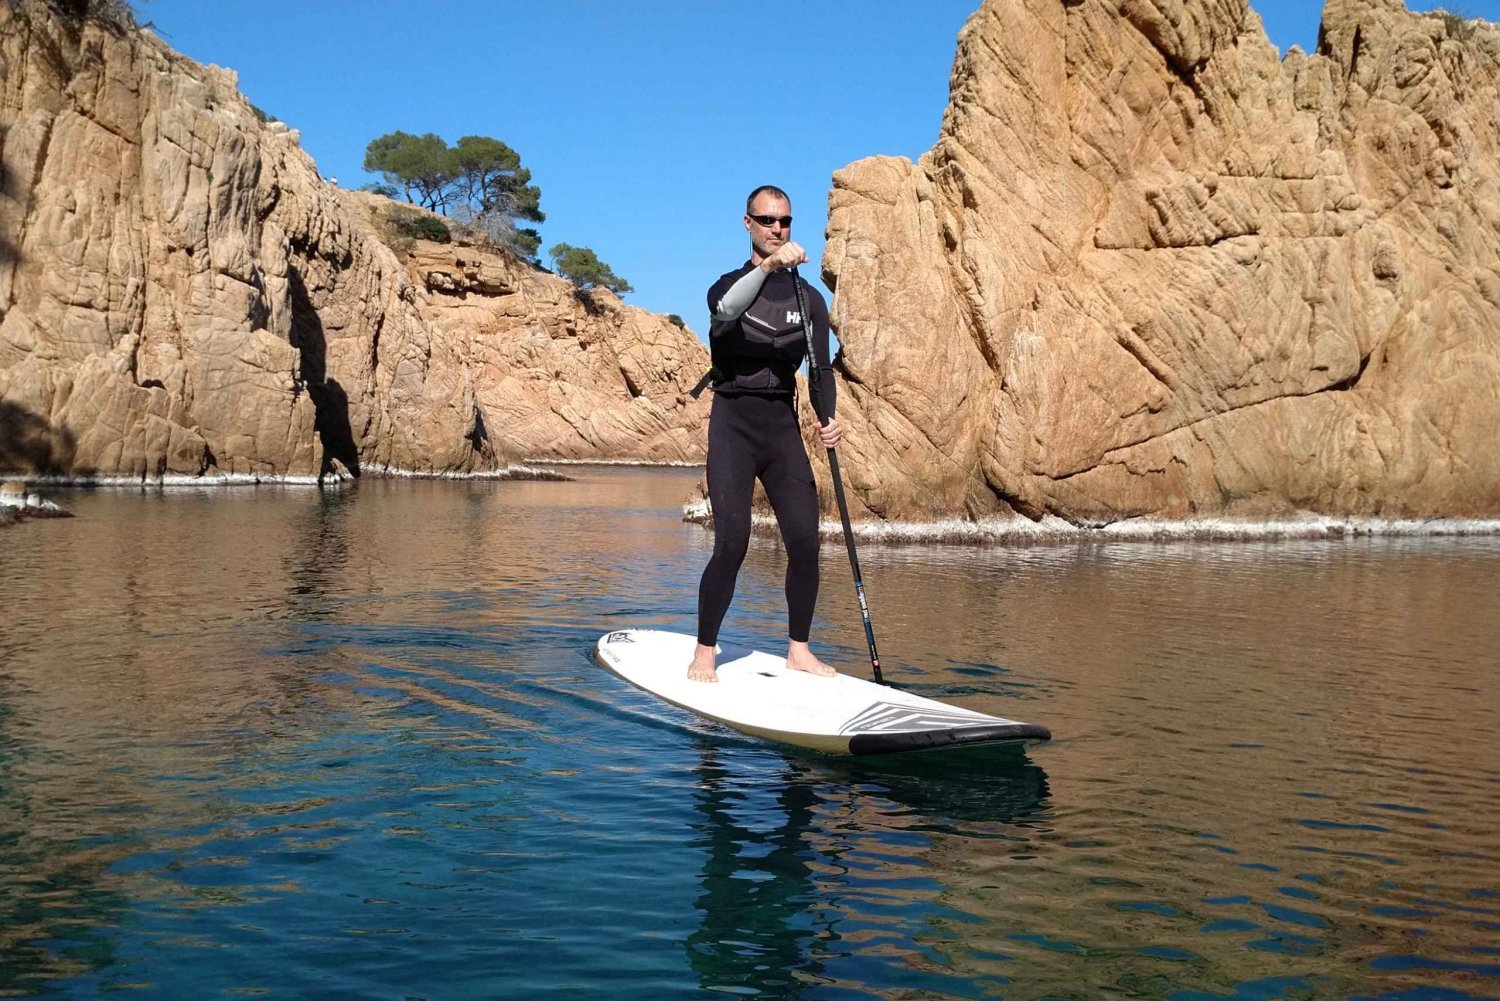 Costa Brava: Stand-Up Paddleboarding Lesson and Tour